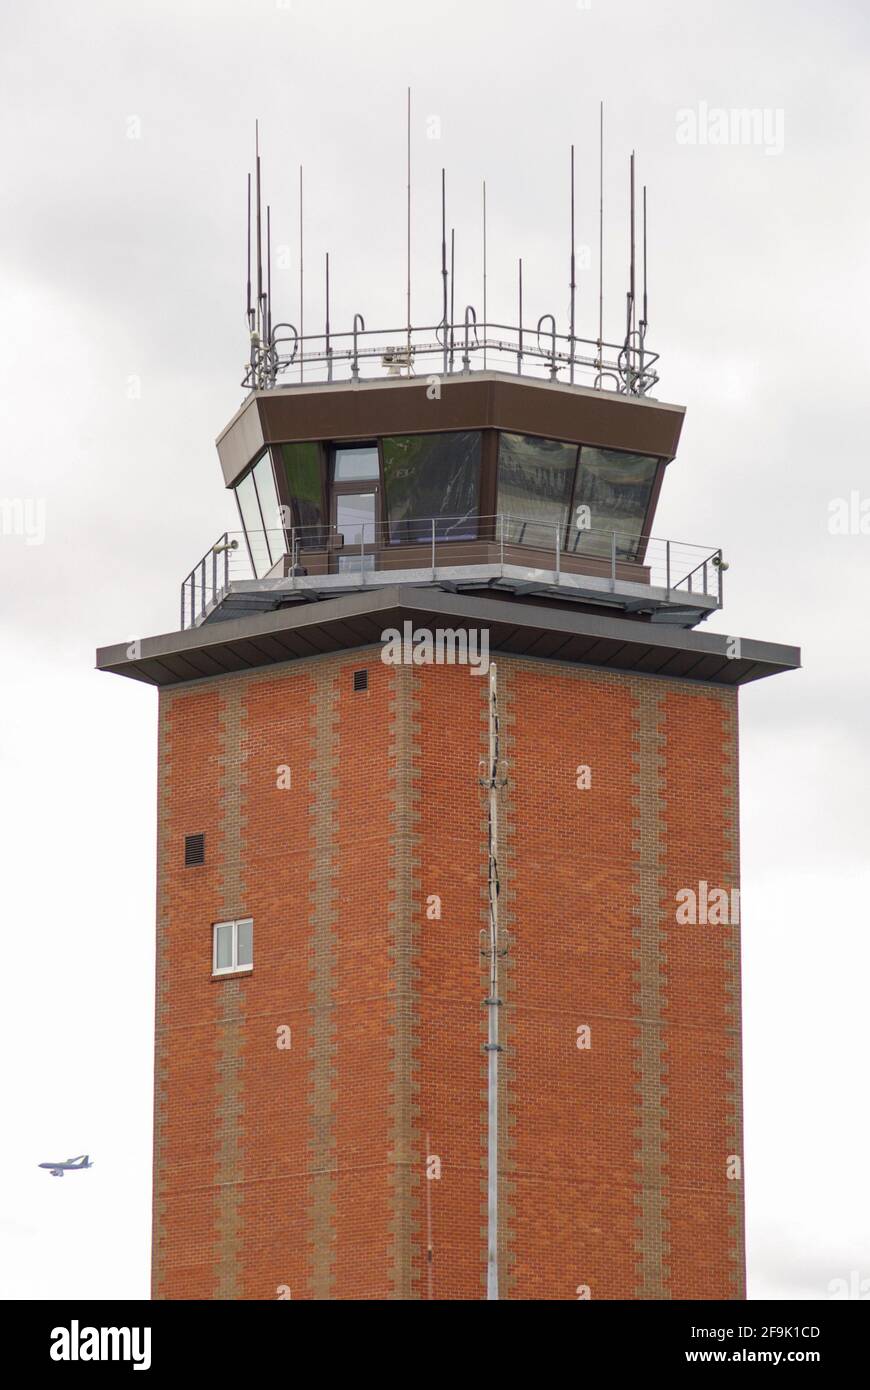 Control tower at RAF Mildenhall, in Suffolk, UK, used by the USAF. United States Air Force airbase tower Stock Photo